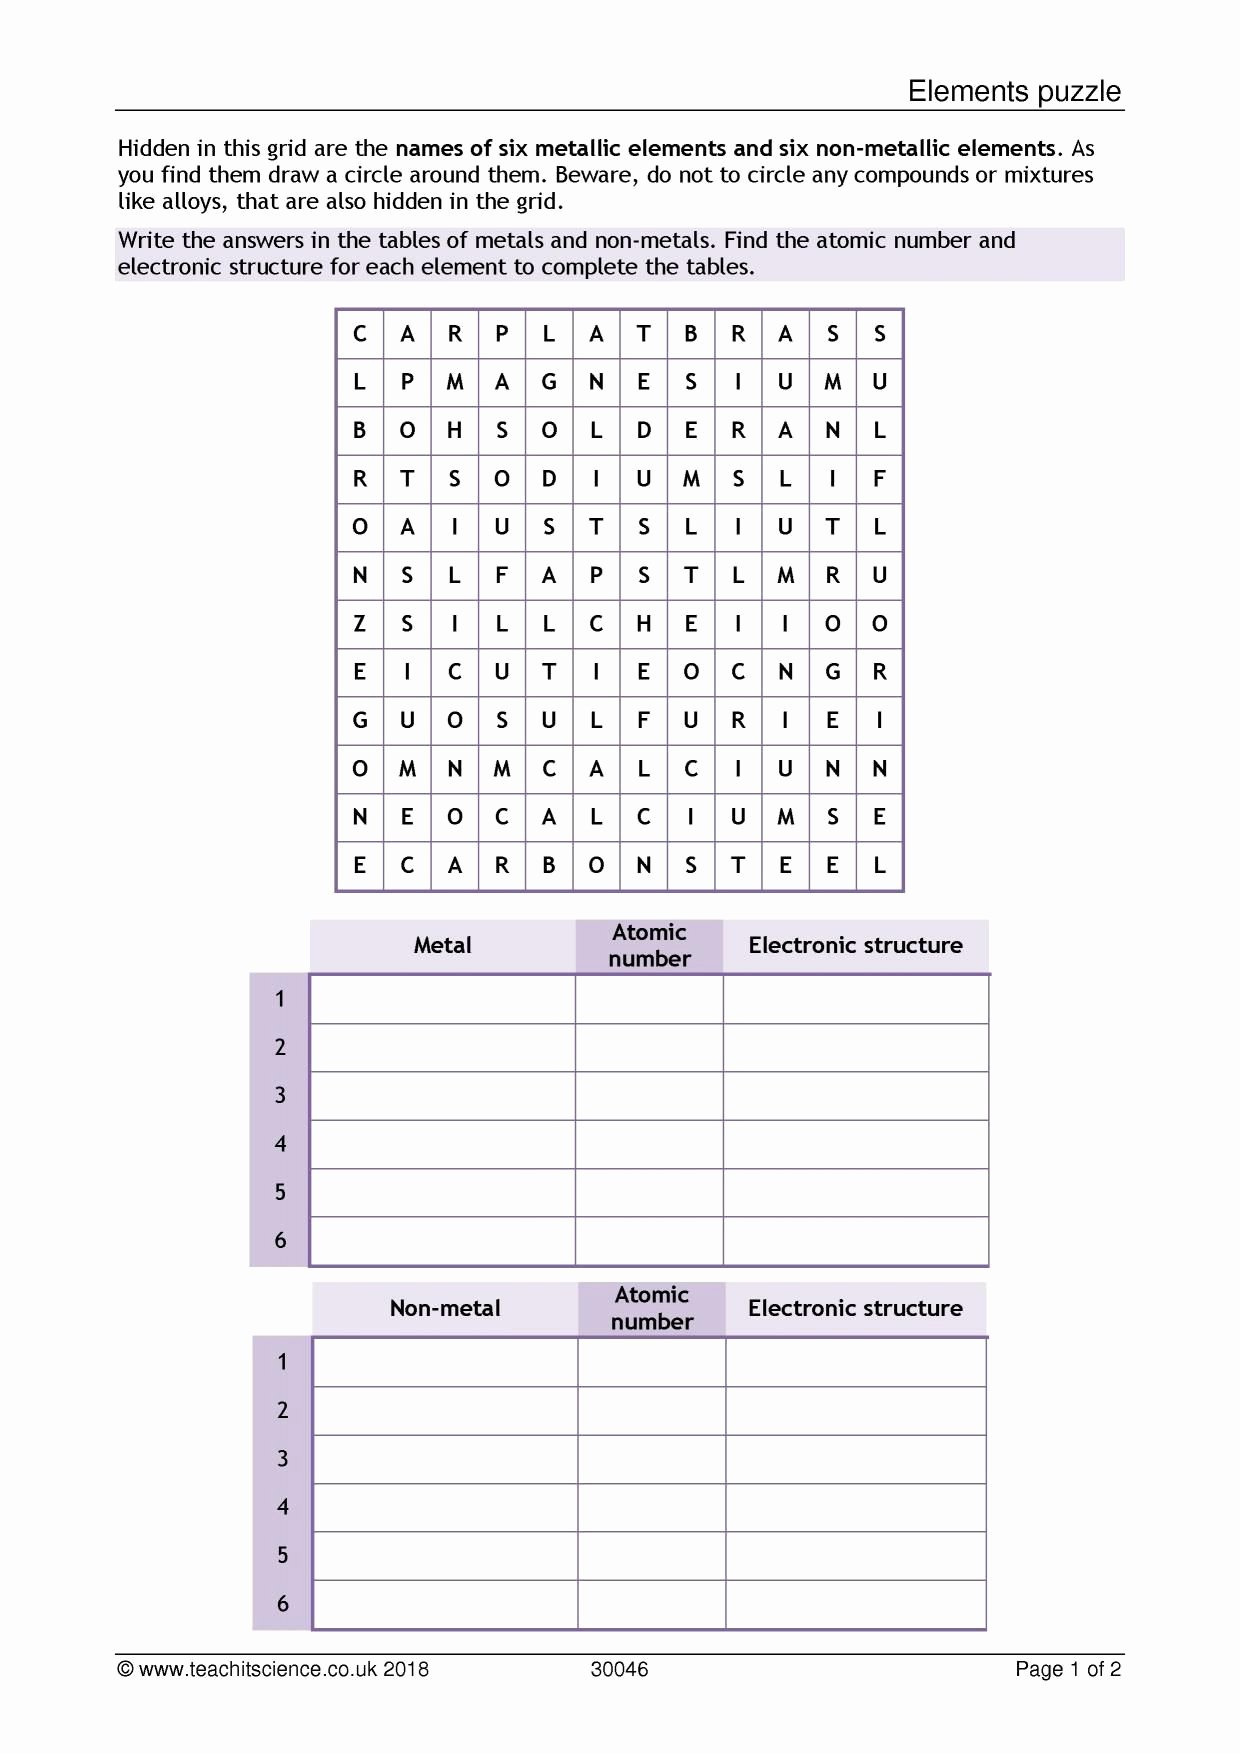 Friction and Gravity Worksheet Answers Lovely Friction and Gravity Lesson Quiz Worksheet